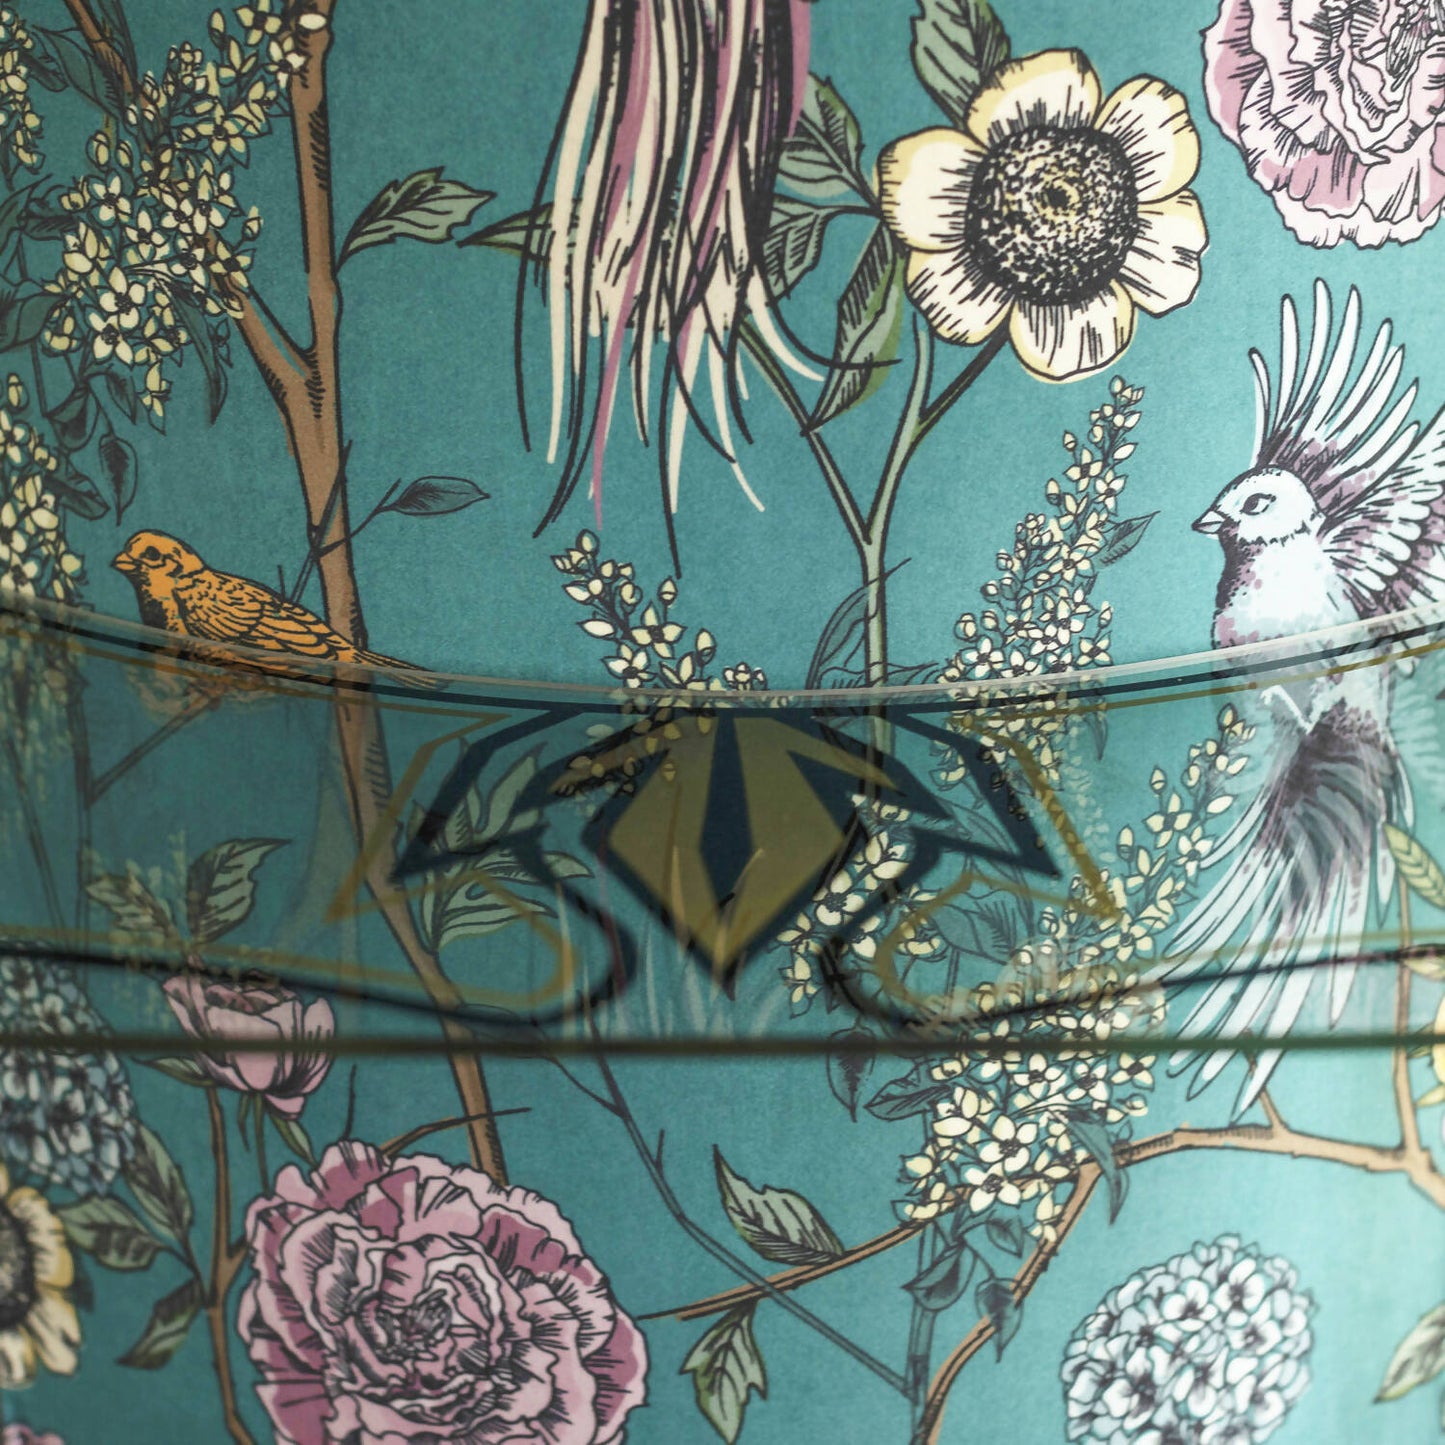 An exceptional art deco drinks cabinet, beautifully decoupaged with Birds of Paradise velvet in a striking combination of pink and teal.